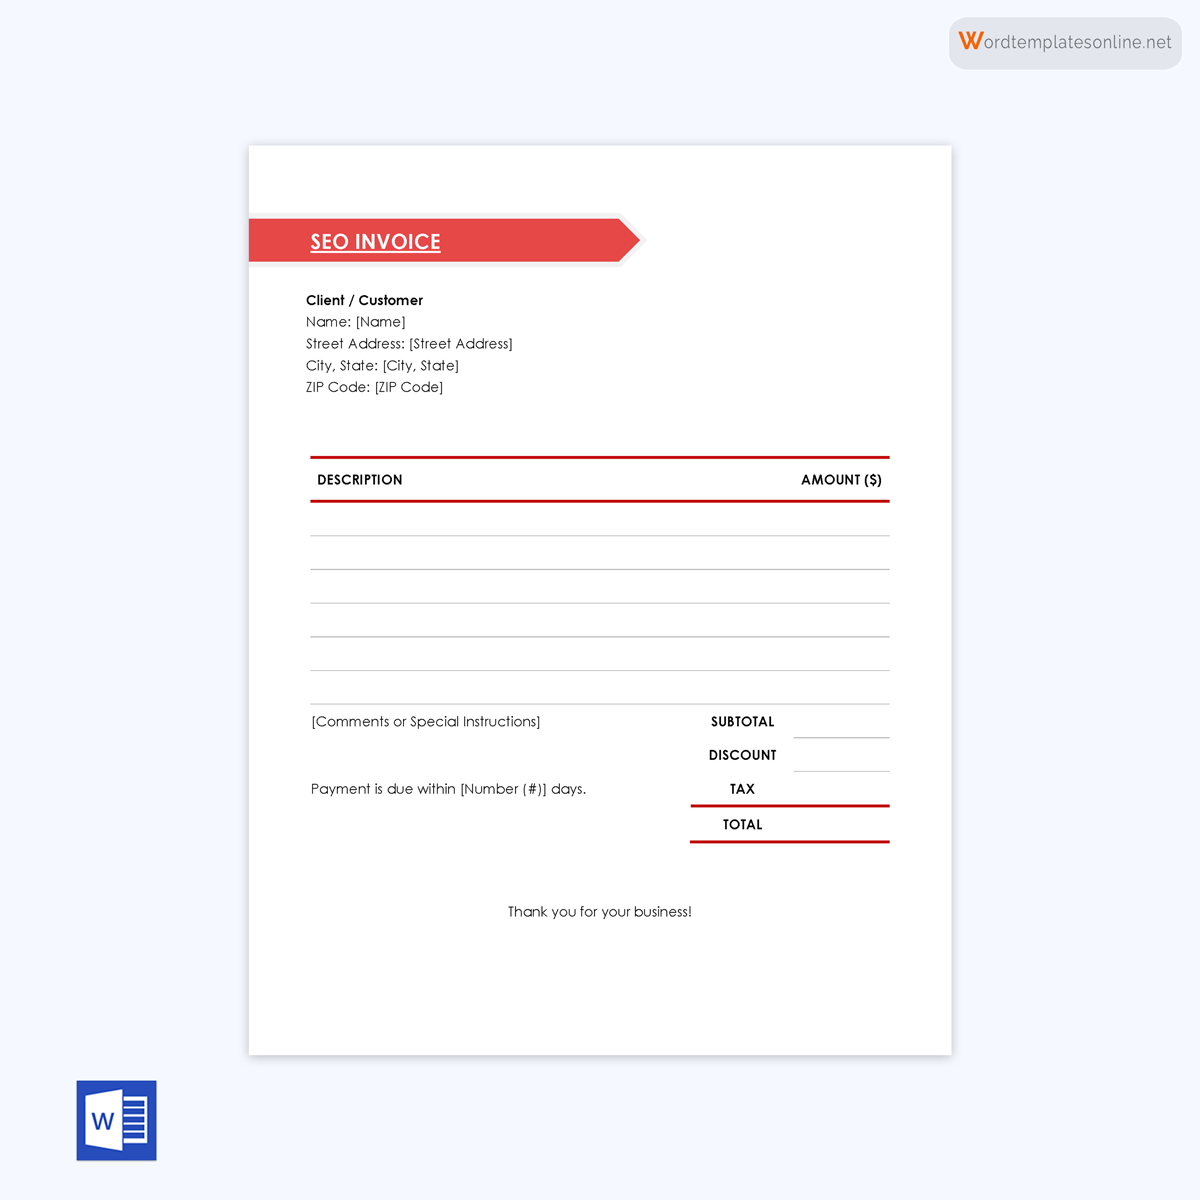 Printable consultant invoice template - free sample